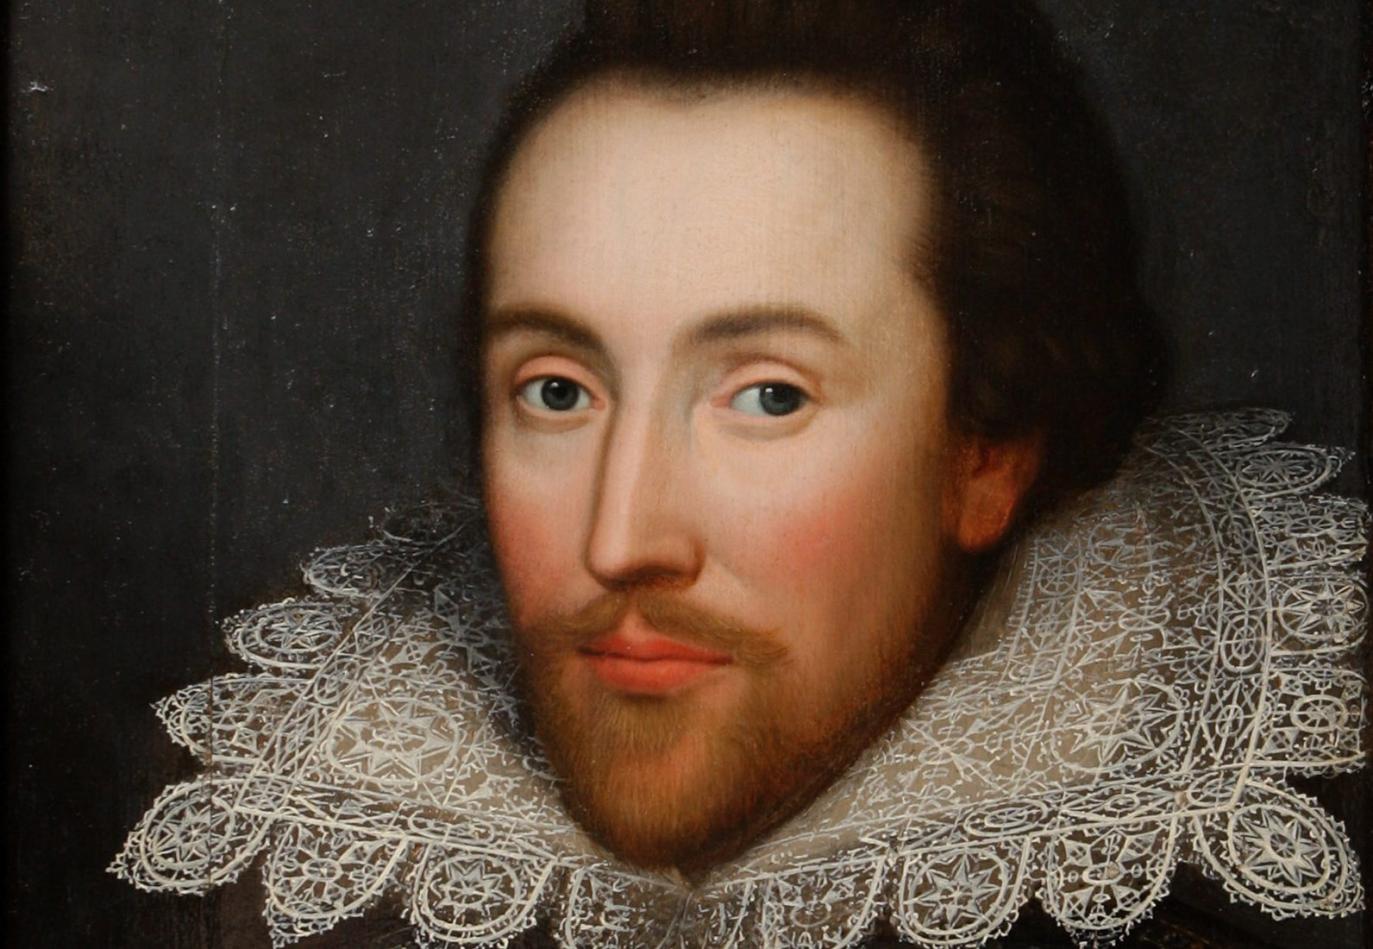 How Can I Learn More About Shakespeare And His Work?